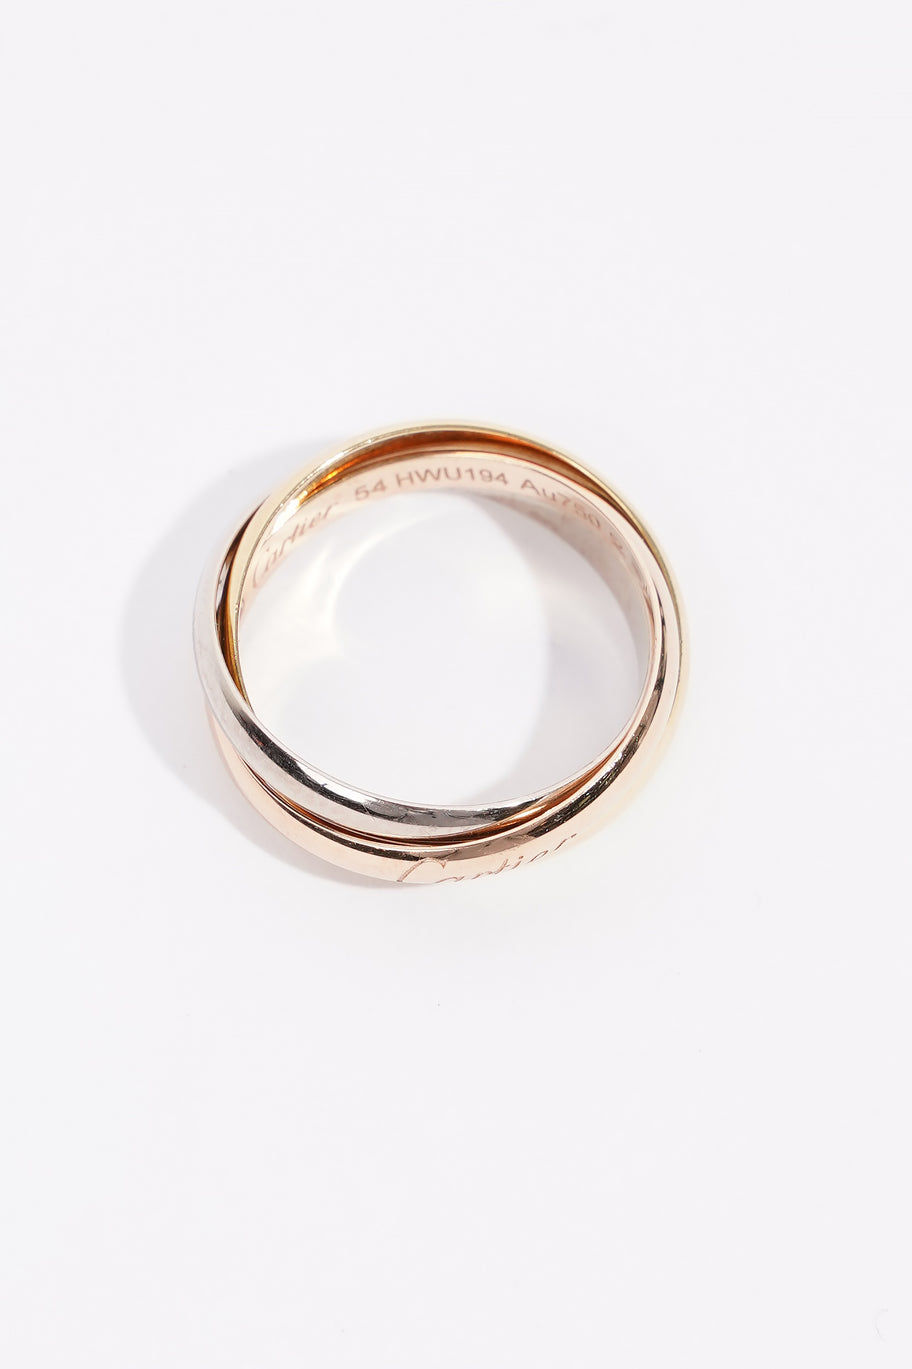 Trinity Ring, Small Model Rose Gold / White Gold Yellow Gold 54mm Image 2